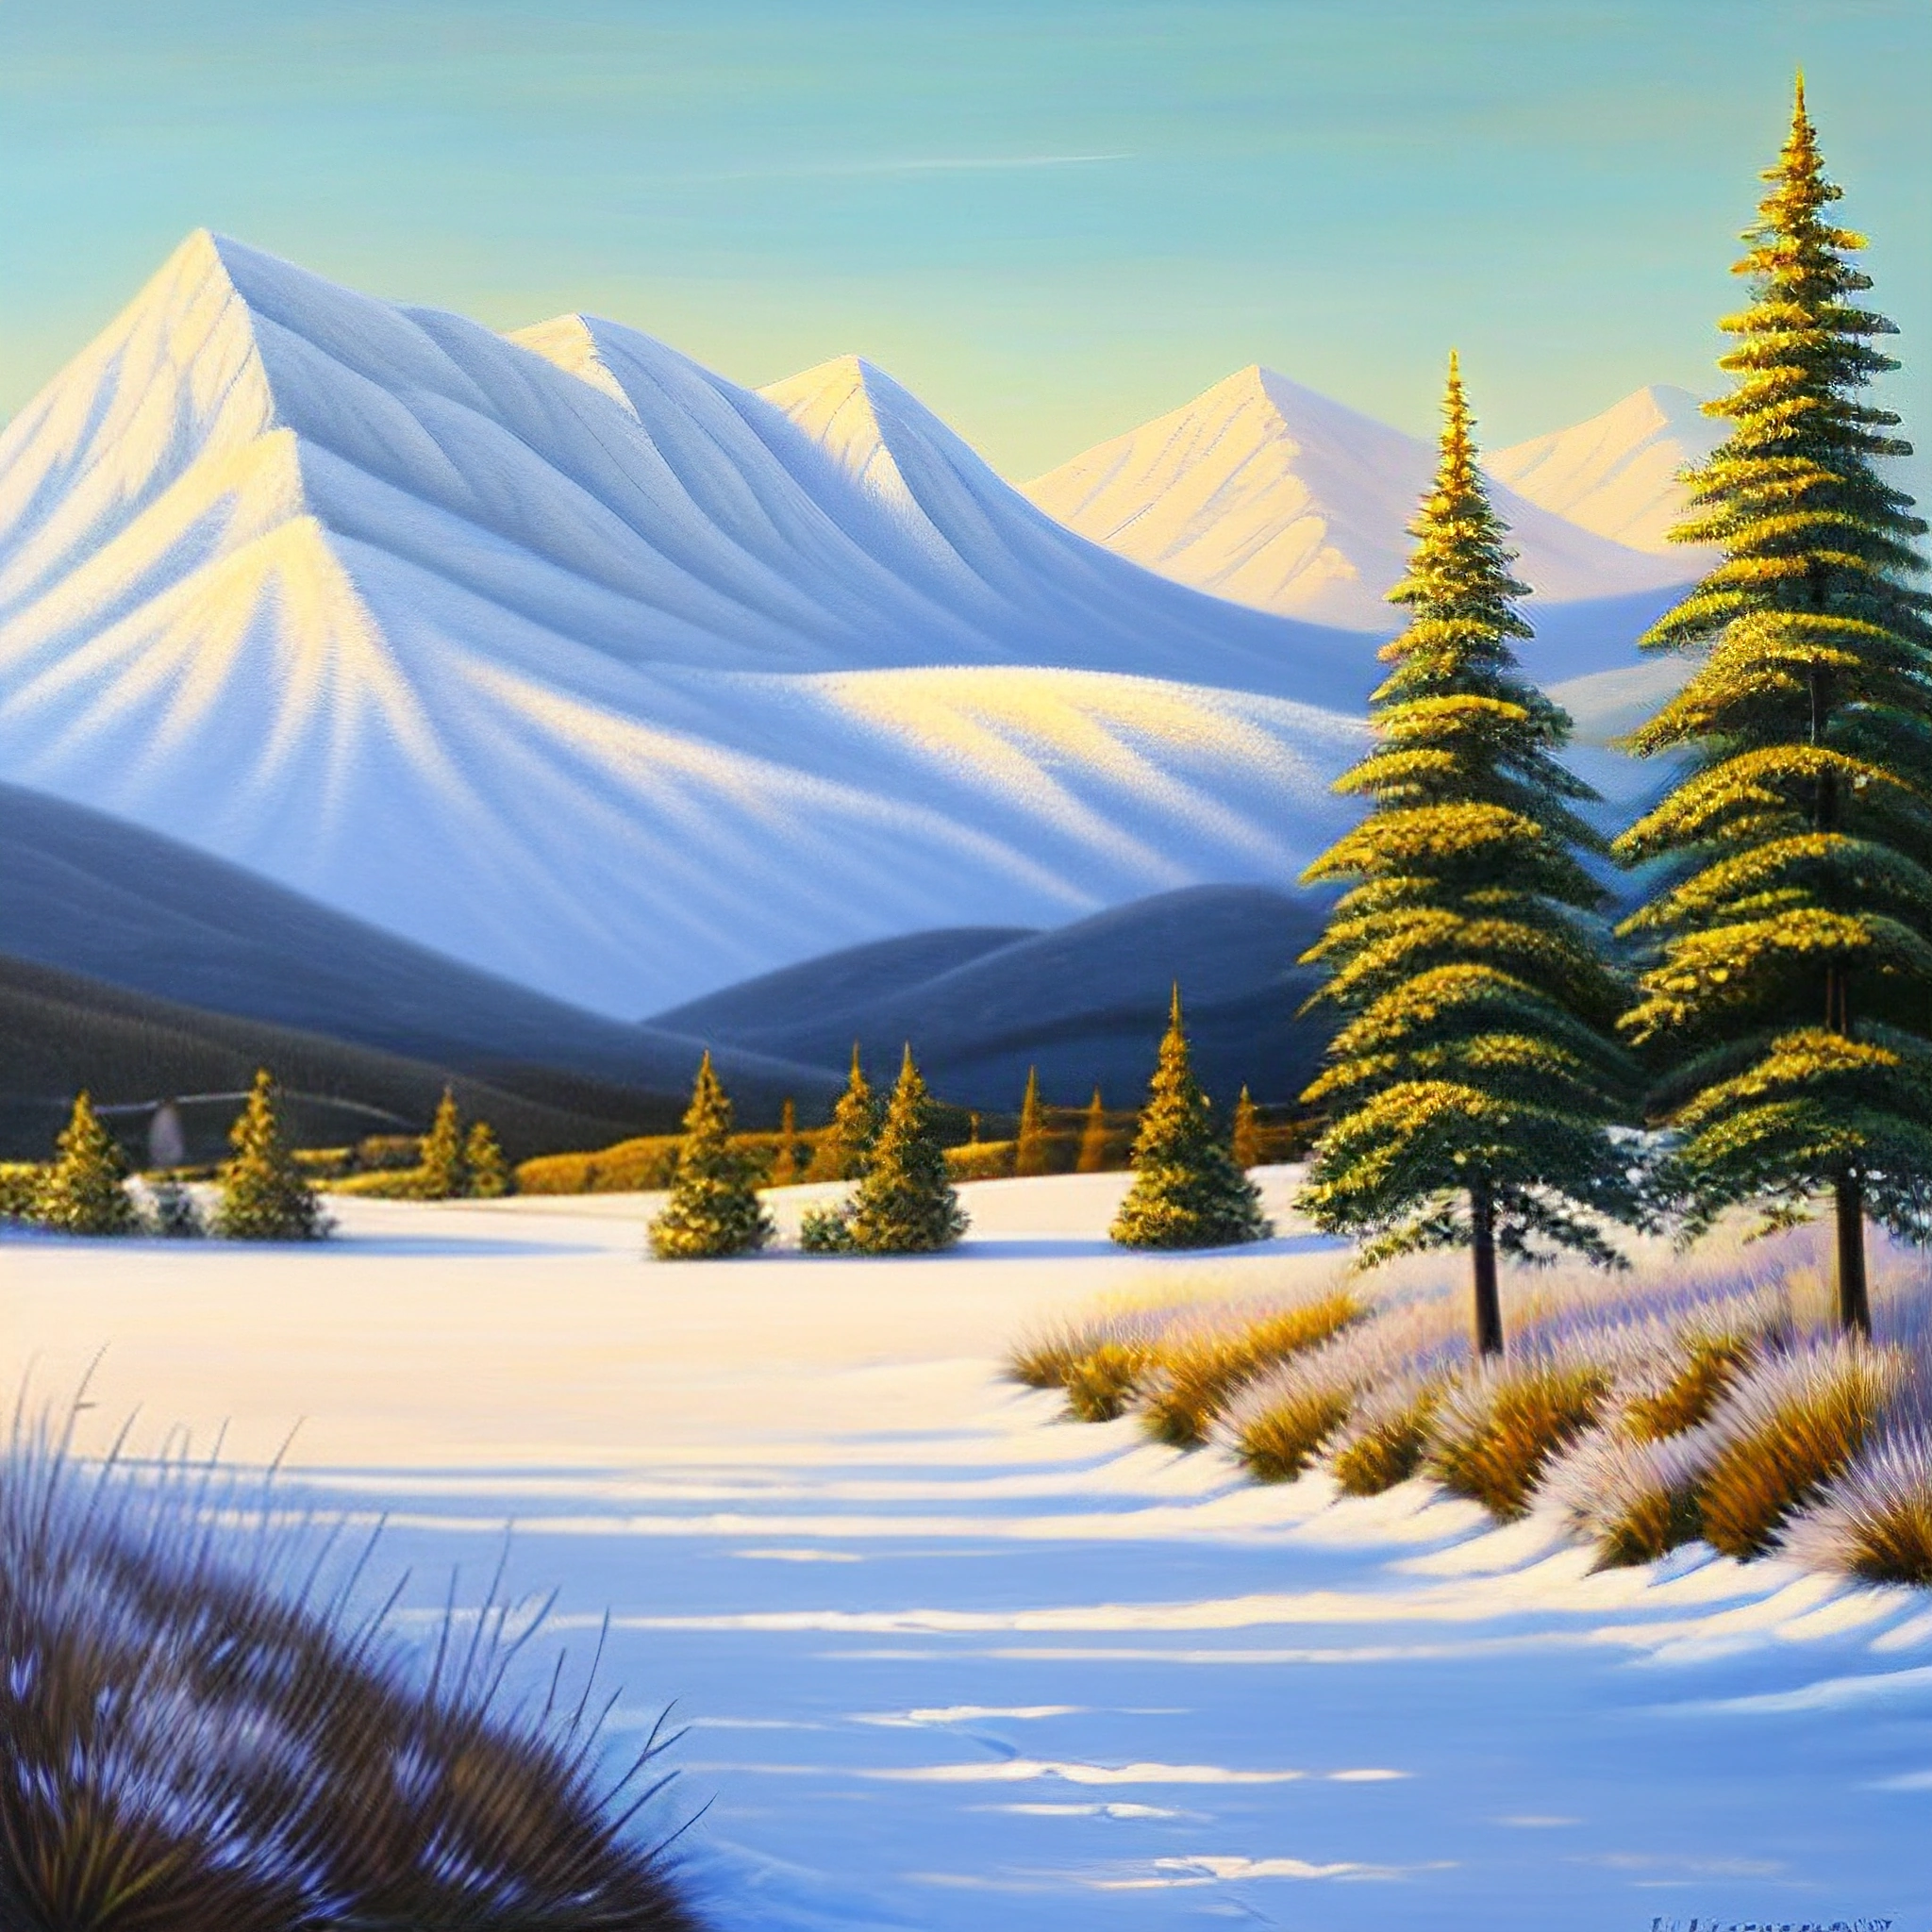 painting of a snowy mountain scene with pine trees and a snow covered field